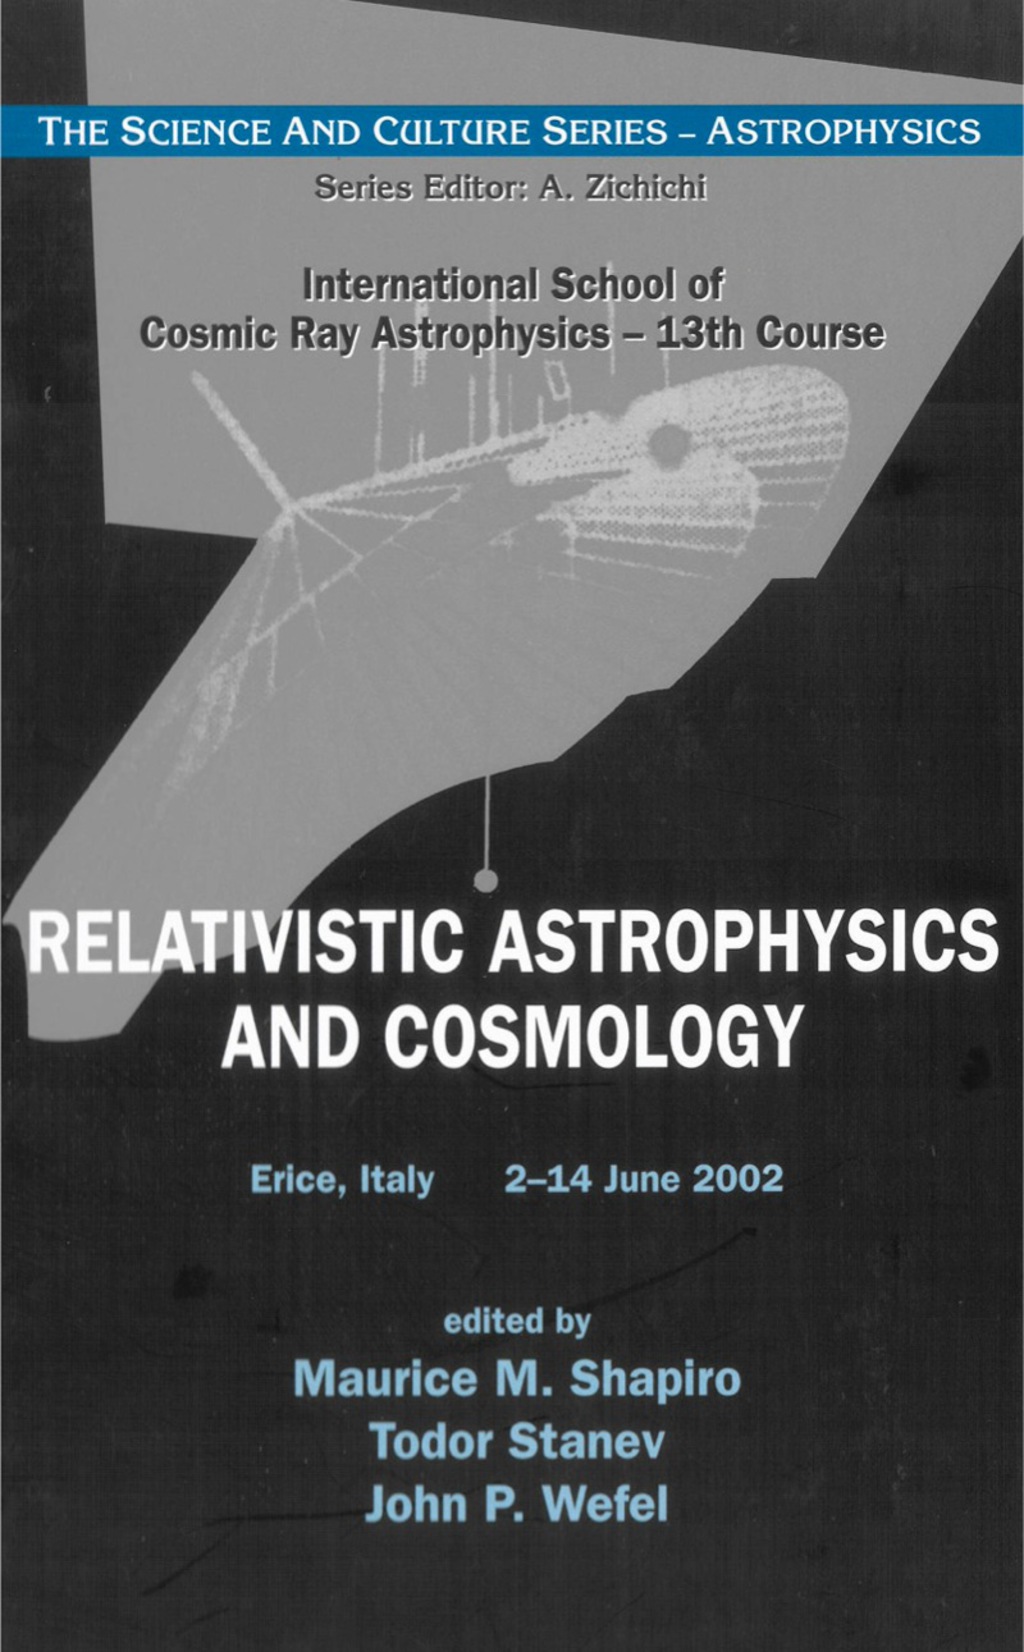 RELATIVISTIC ASTROPHYSICS AND COSMOLOGY - PROCEEDINGS OF THE 13TH COURSE OF THE INTERNATIONAL SCHOOL OF COSMIC RAY ASTROP (eBook) - Shapiro Maurice M,